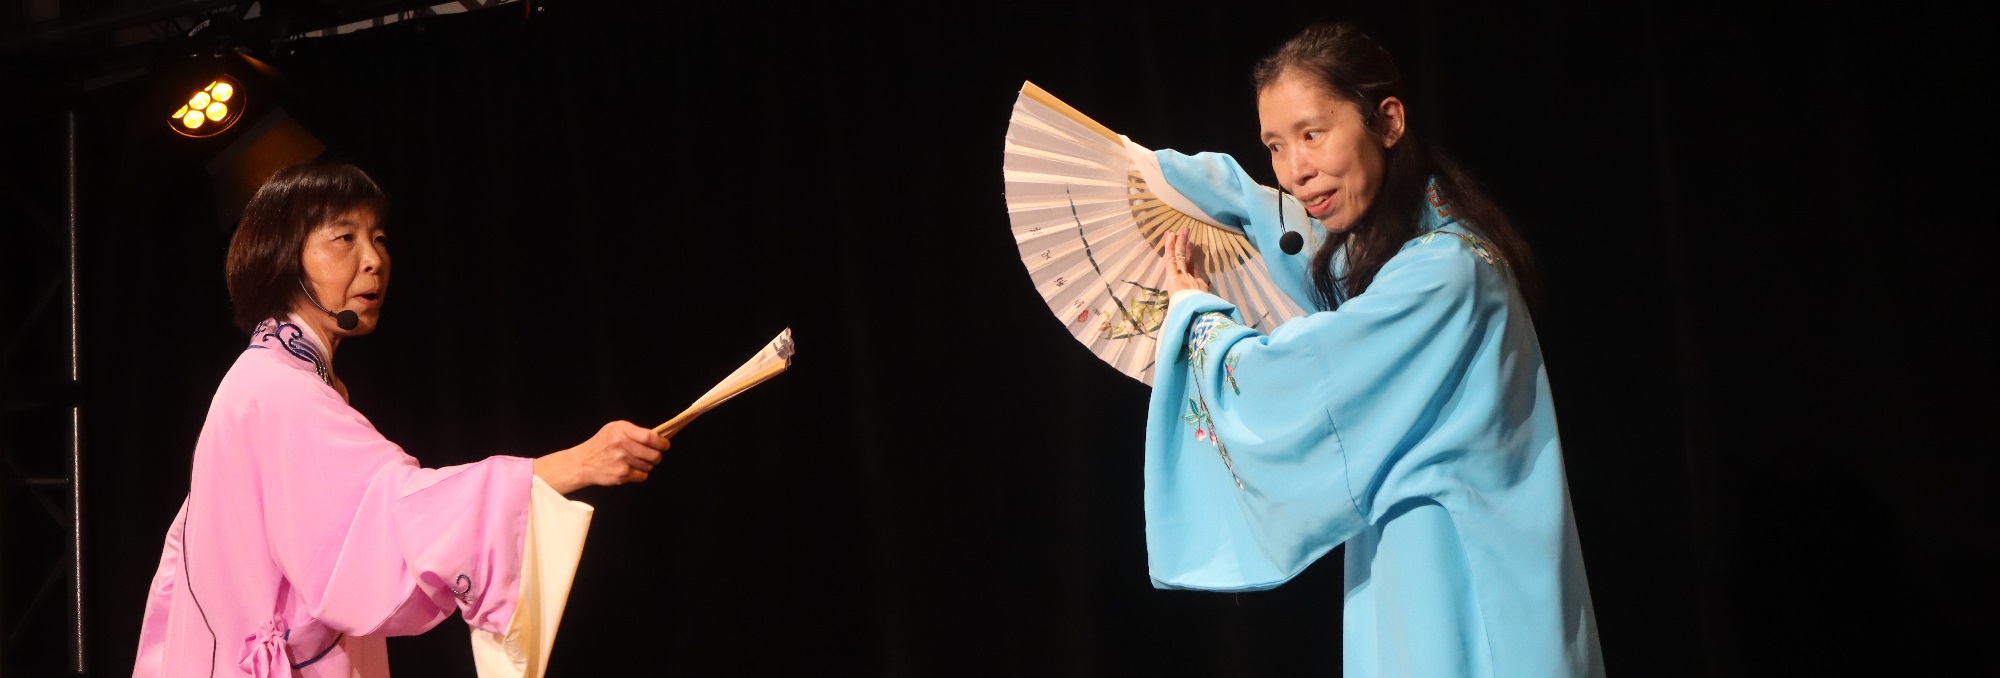 Ruo Hong (left) and Shi Bei (right) of the Meng Wei Yue Opera perform 